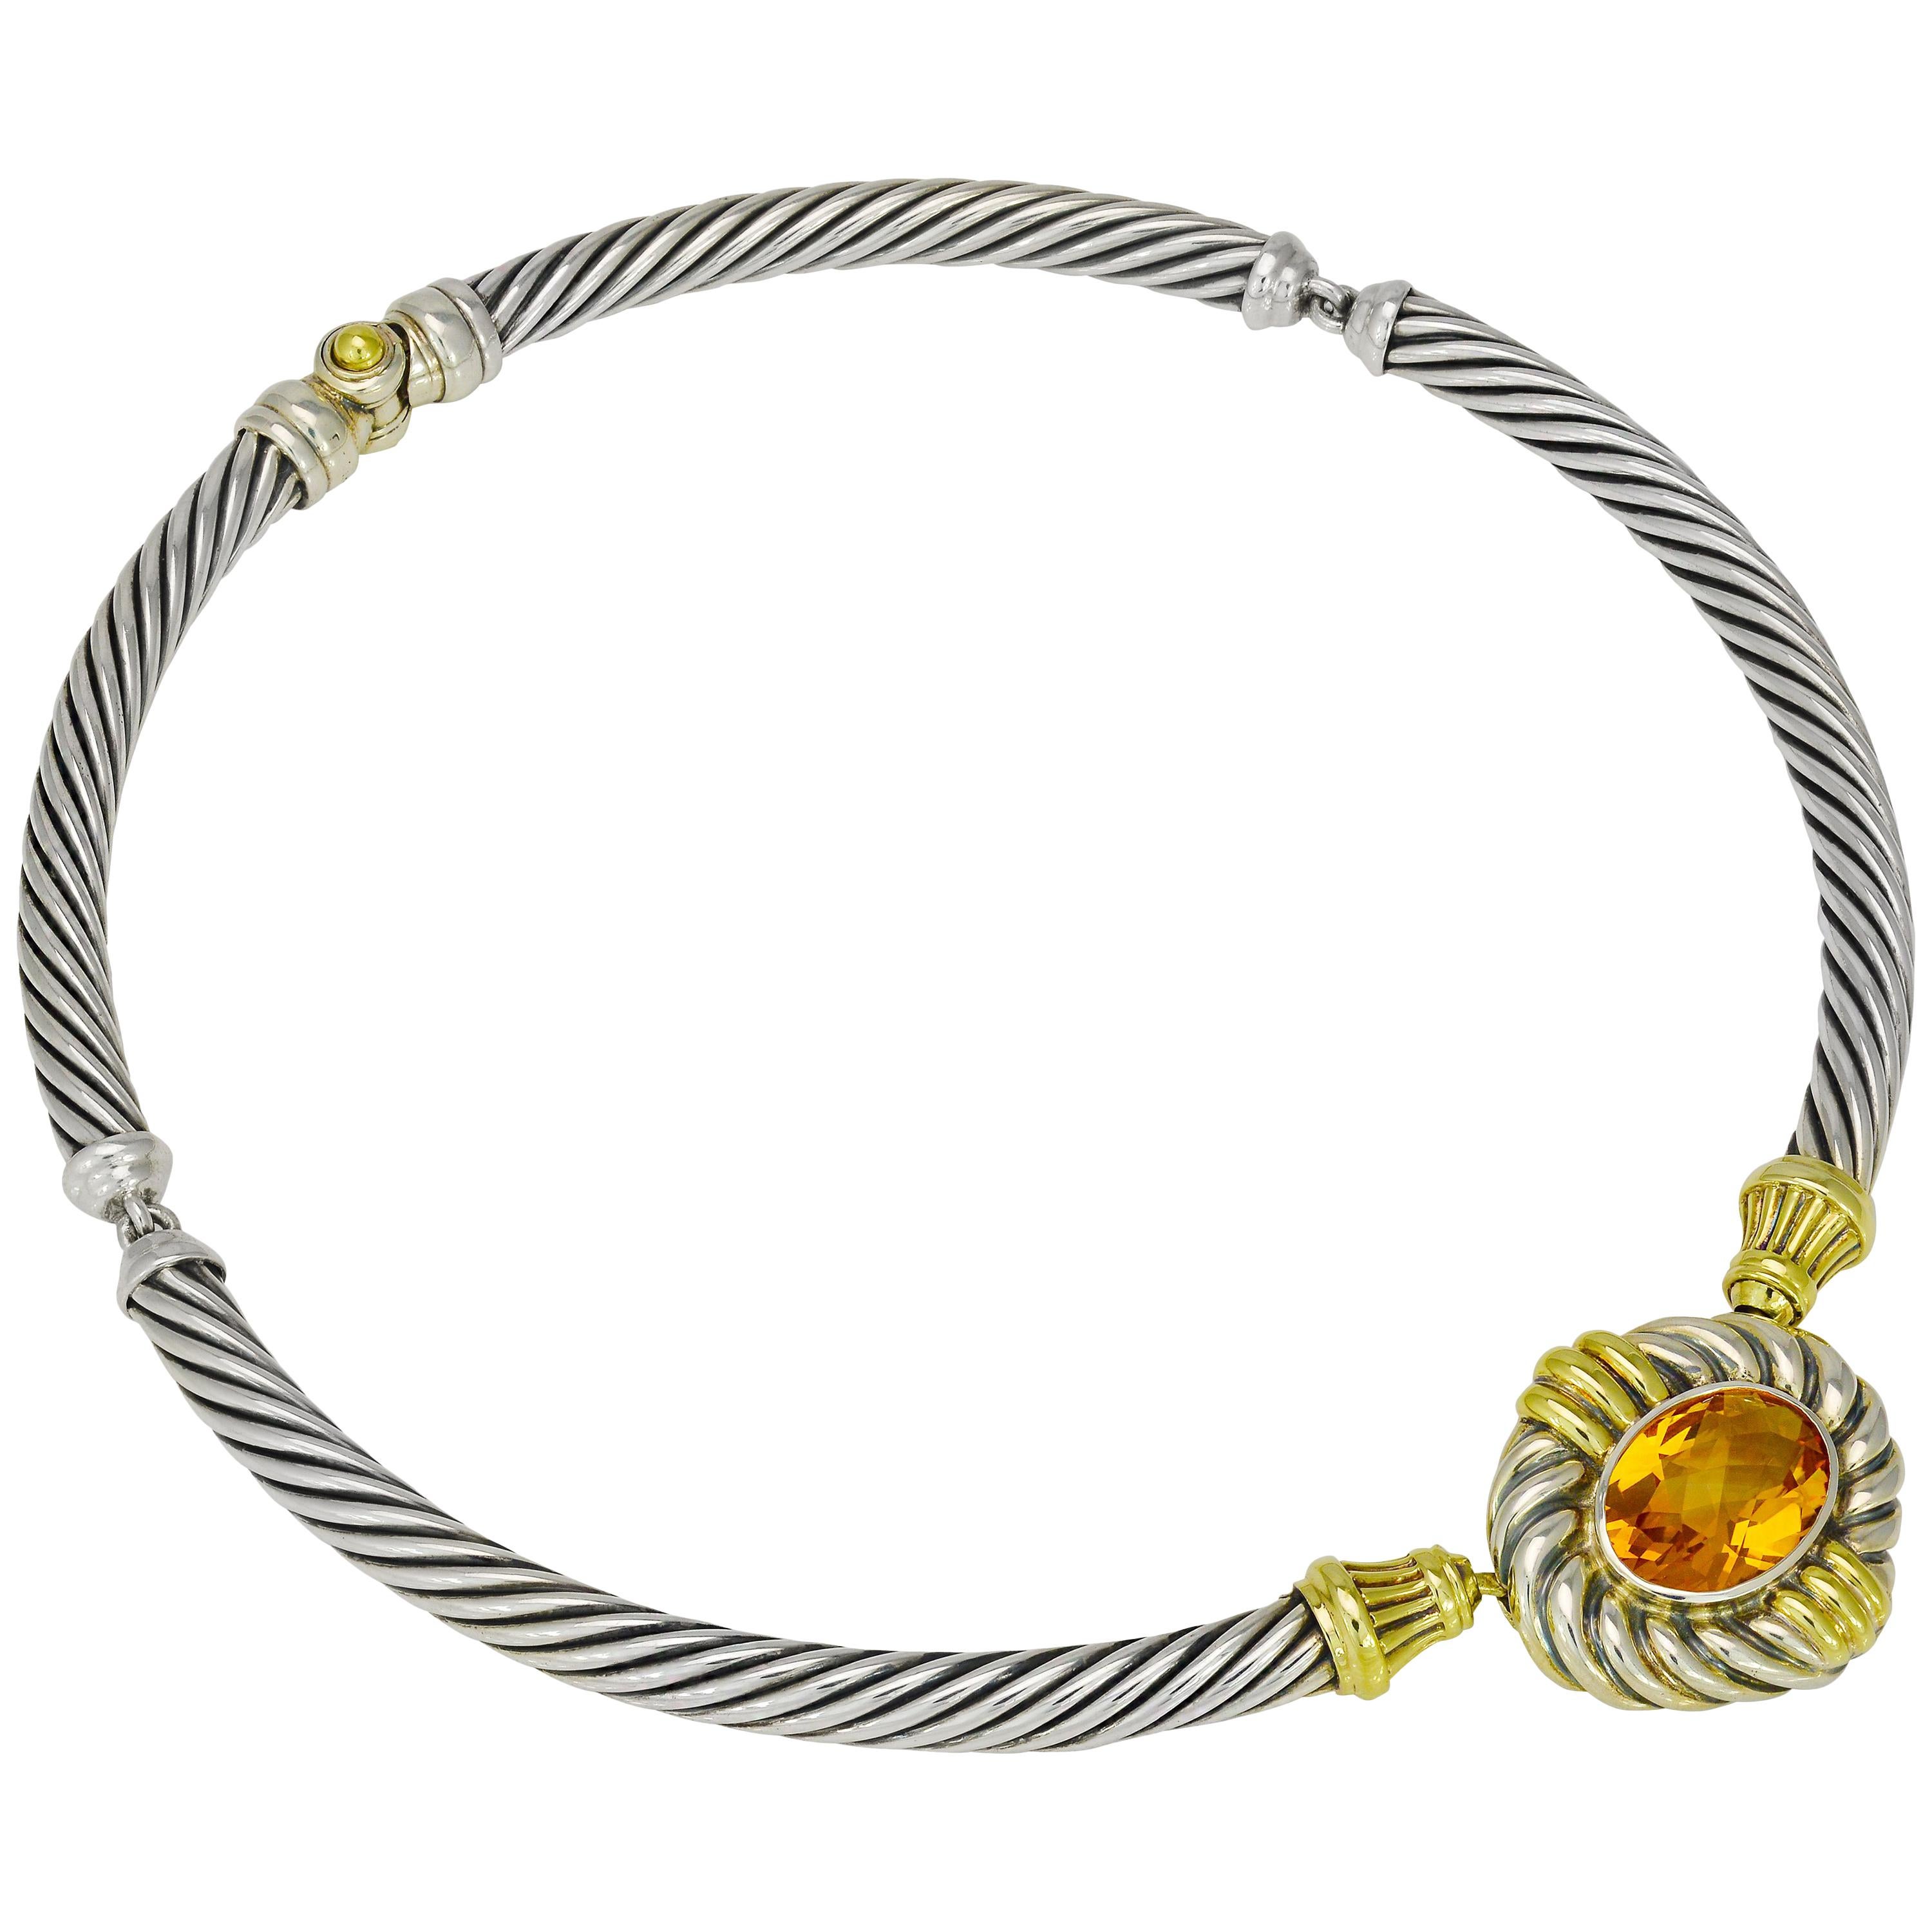 David Yurman Sterling Silver and Citrine Collar Necklace